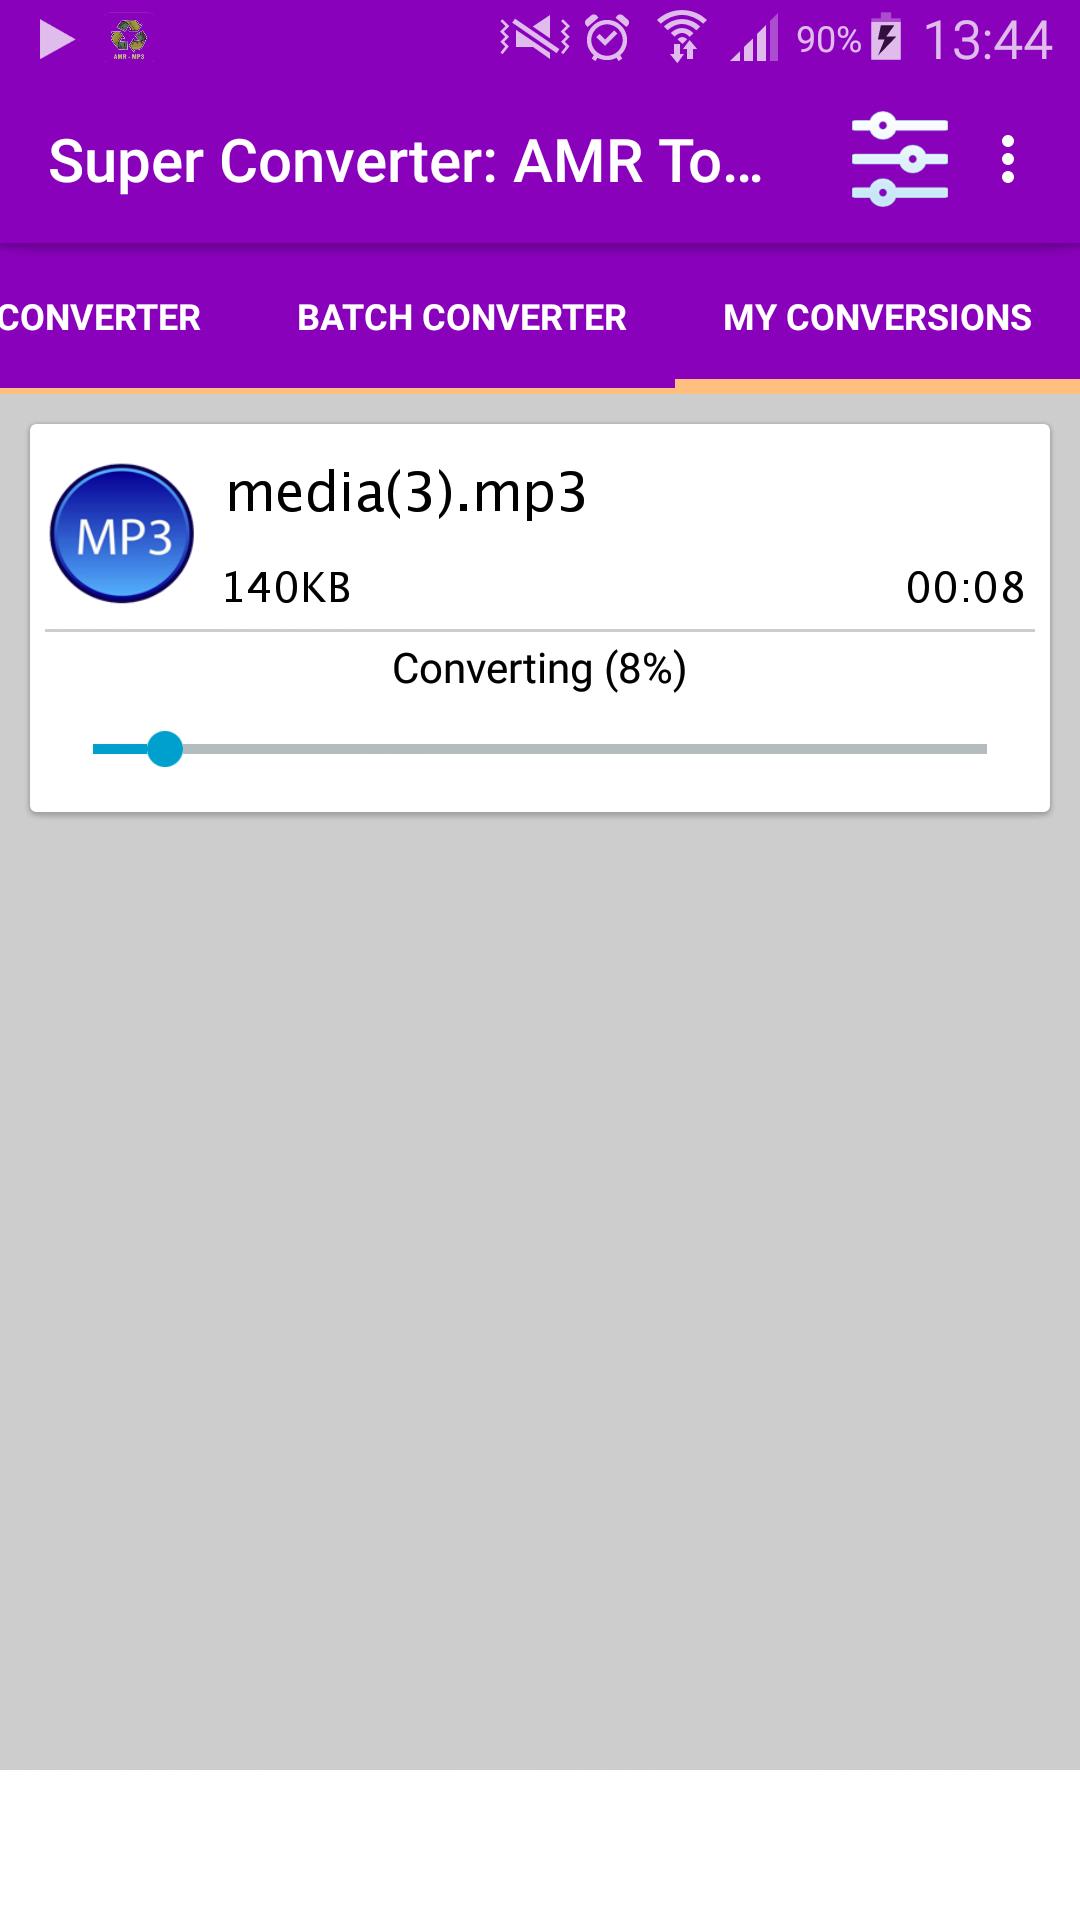 Super Converter : AMR To MP3 for Android - APK Download